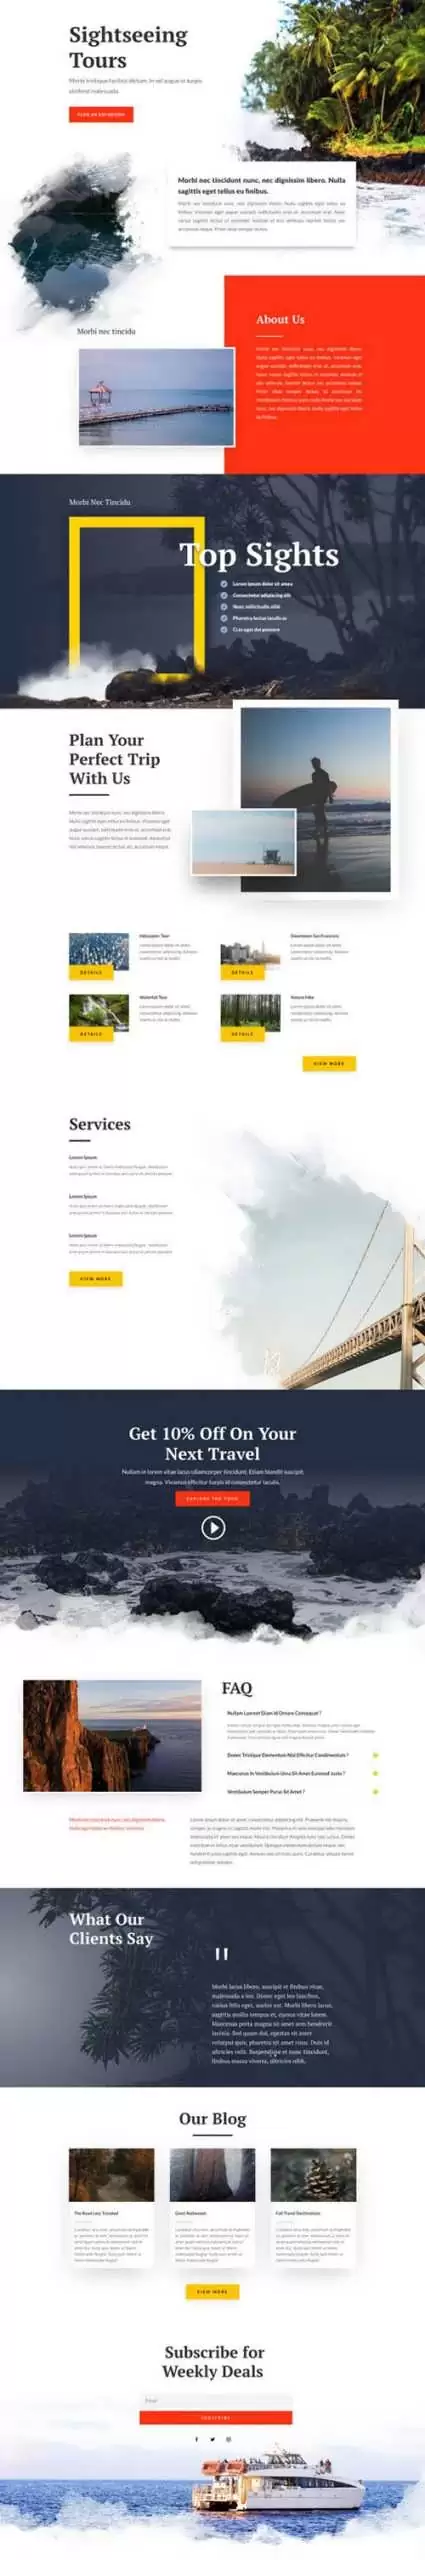 sightseeing landing page scaled